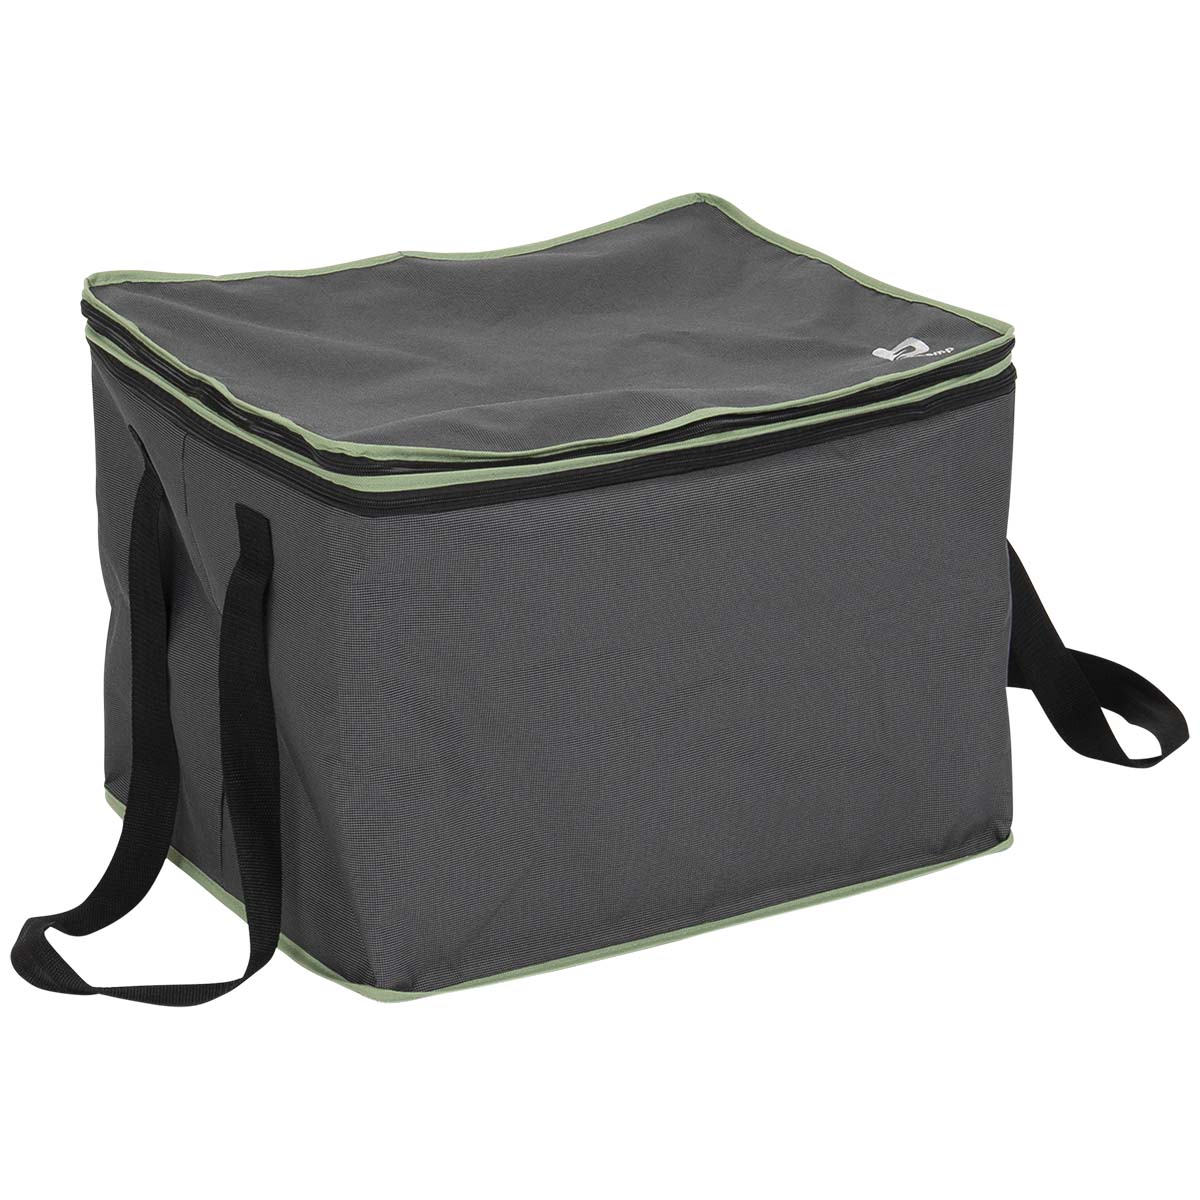 4117381 This toilet storage bag allows you to easily and safely transport your toilet. The bag has a zipper that allows the bag to be made larger and smaller. This allows almost any toilet to be carried in this bag. The bag is made of Two-Tone 600D Oxford Polyester.